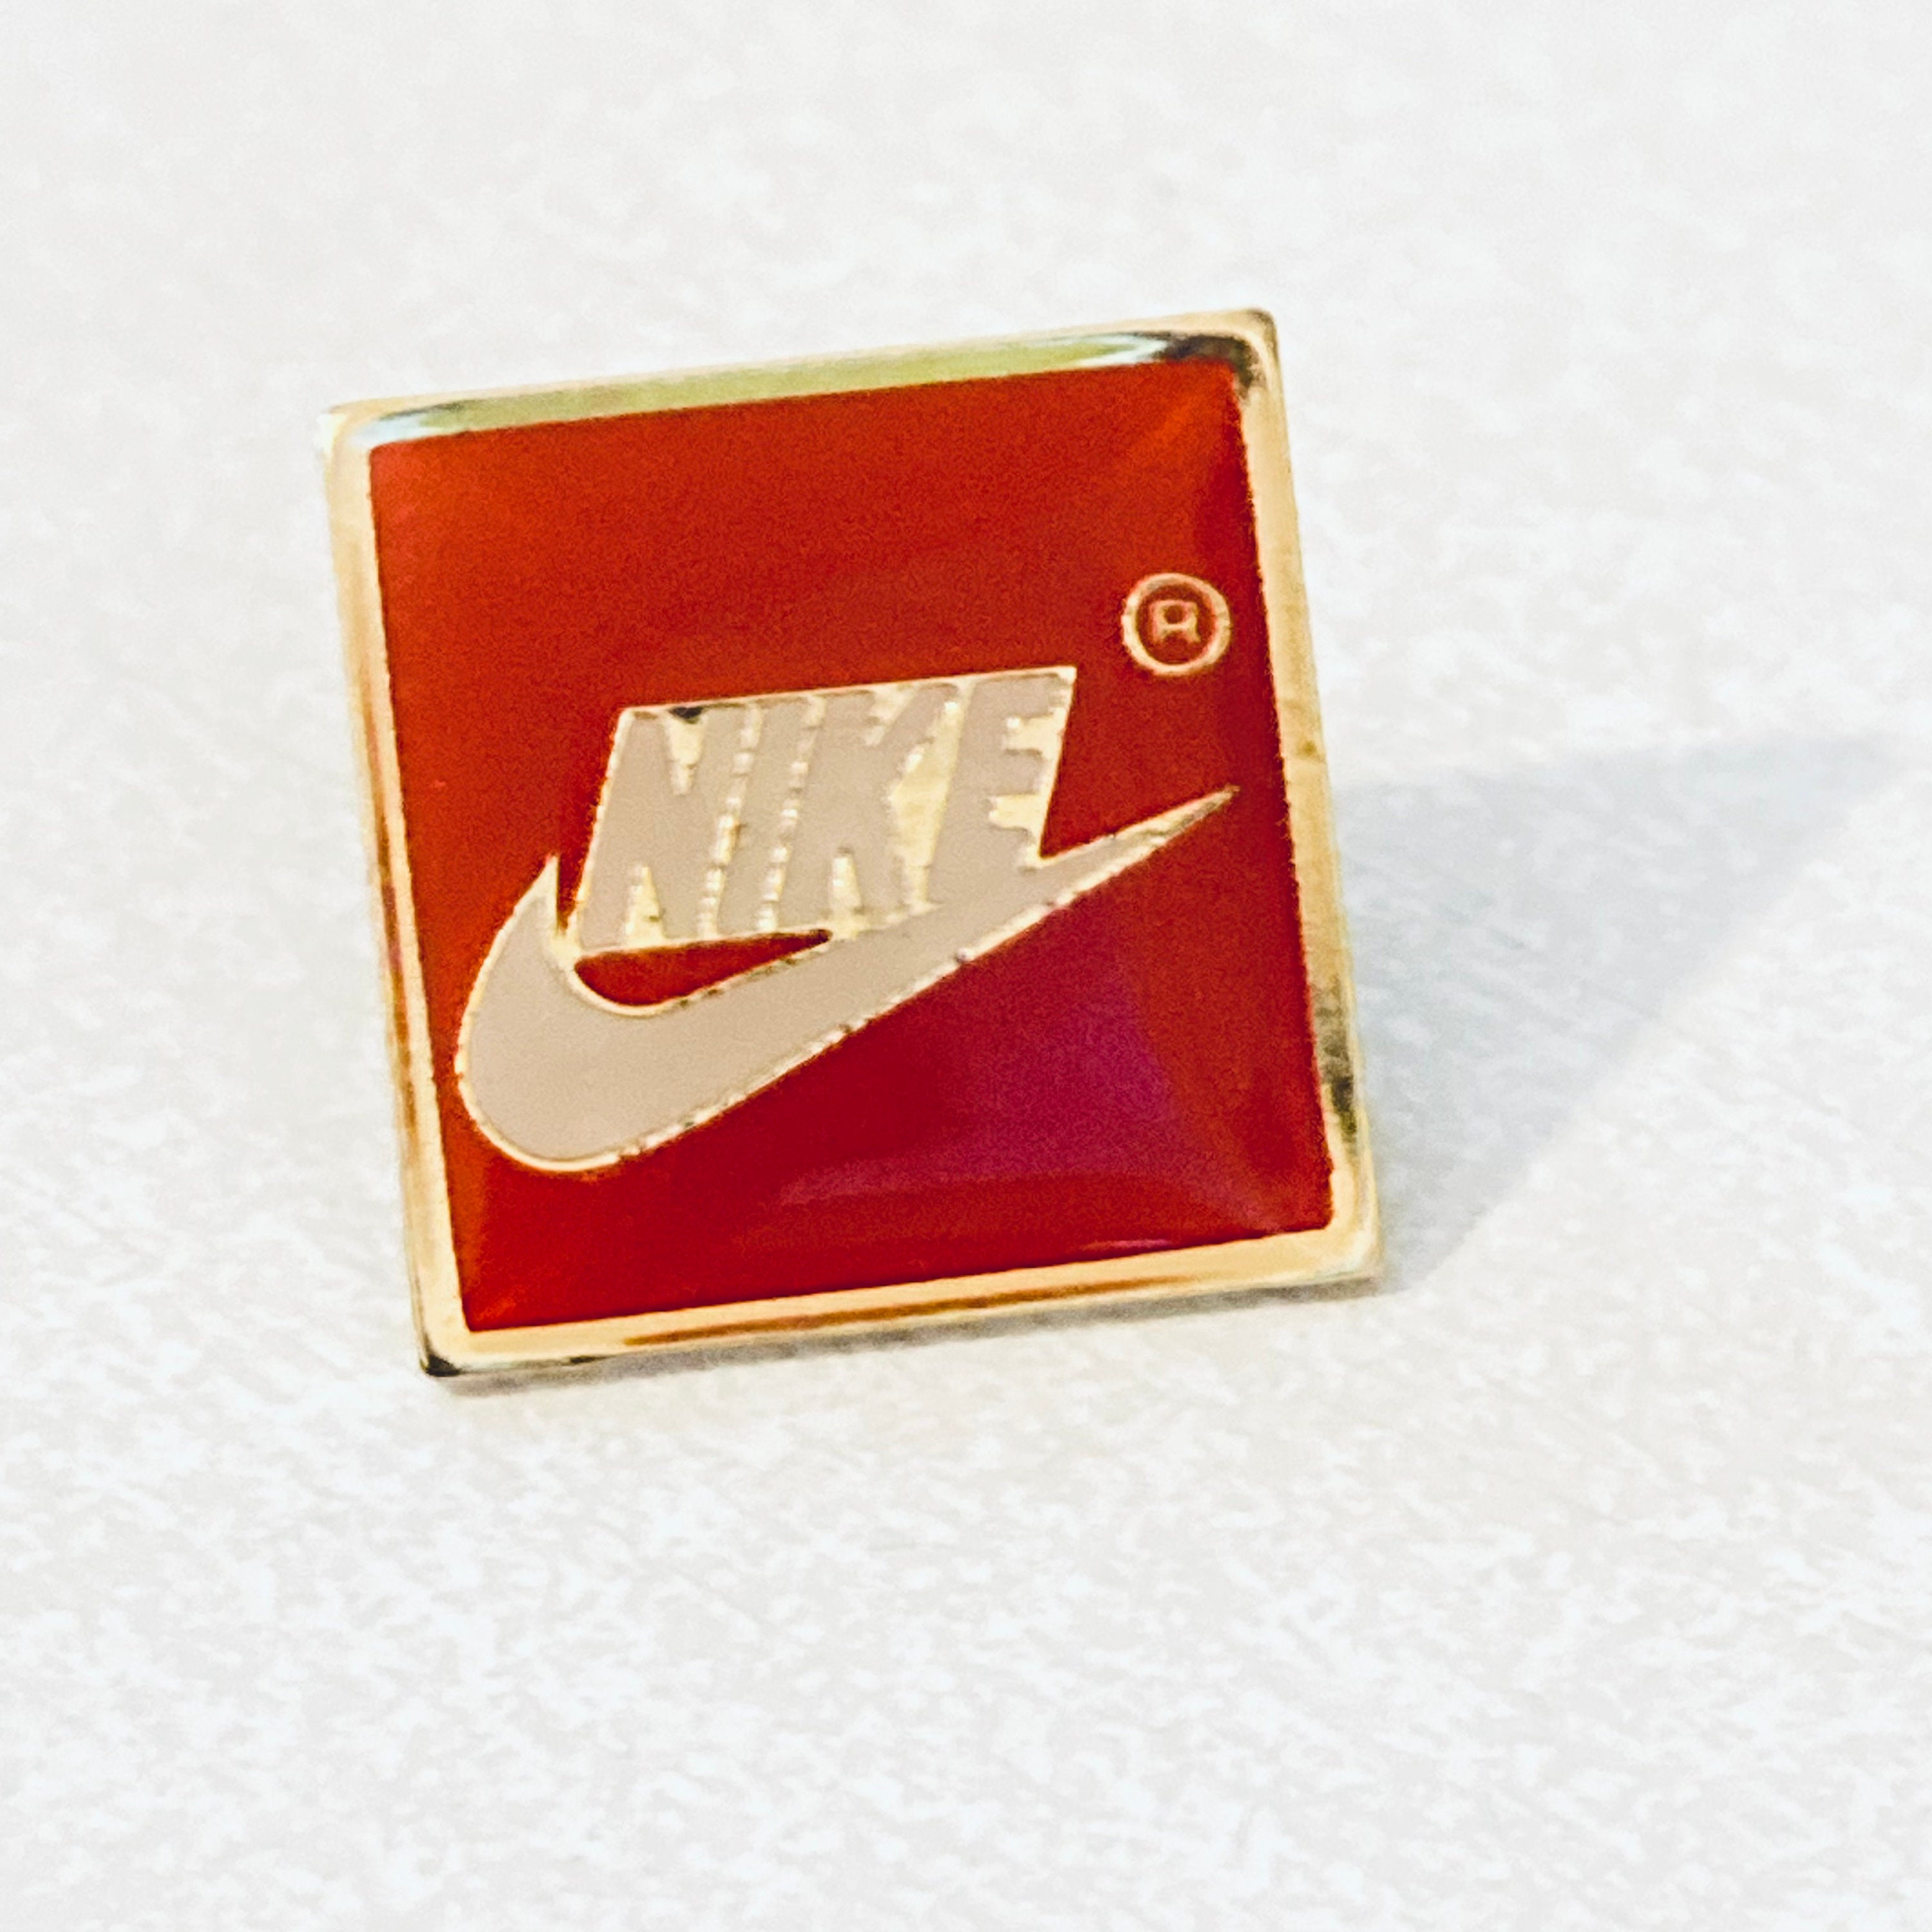 Pin on Nike slippers